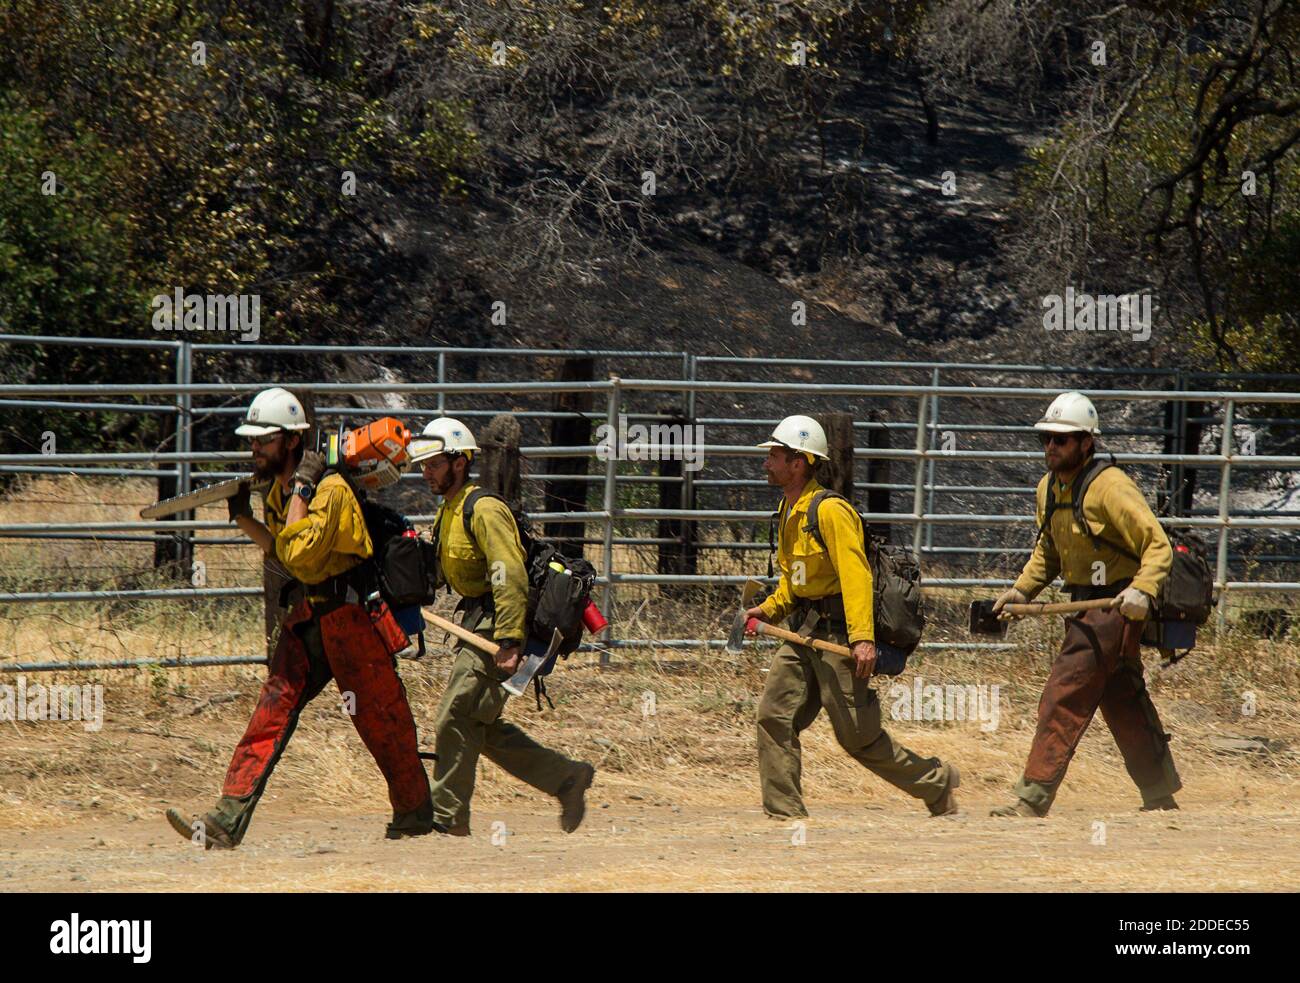 NO FILM, NO VIDEO, NO TV, NO DOCUMENTARY - Fire crews deploy to fight the County Fire, which has burned more than 22,000 acres without containment, on Sunday, July 1, 2018 in Capay Valley, CA, USA. Photo by Paul Kitagaki Jr./Sacramento Bee/TNS/ABACAPRESS.COM Stock Photo